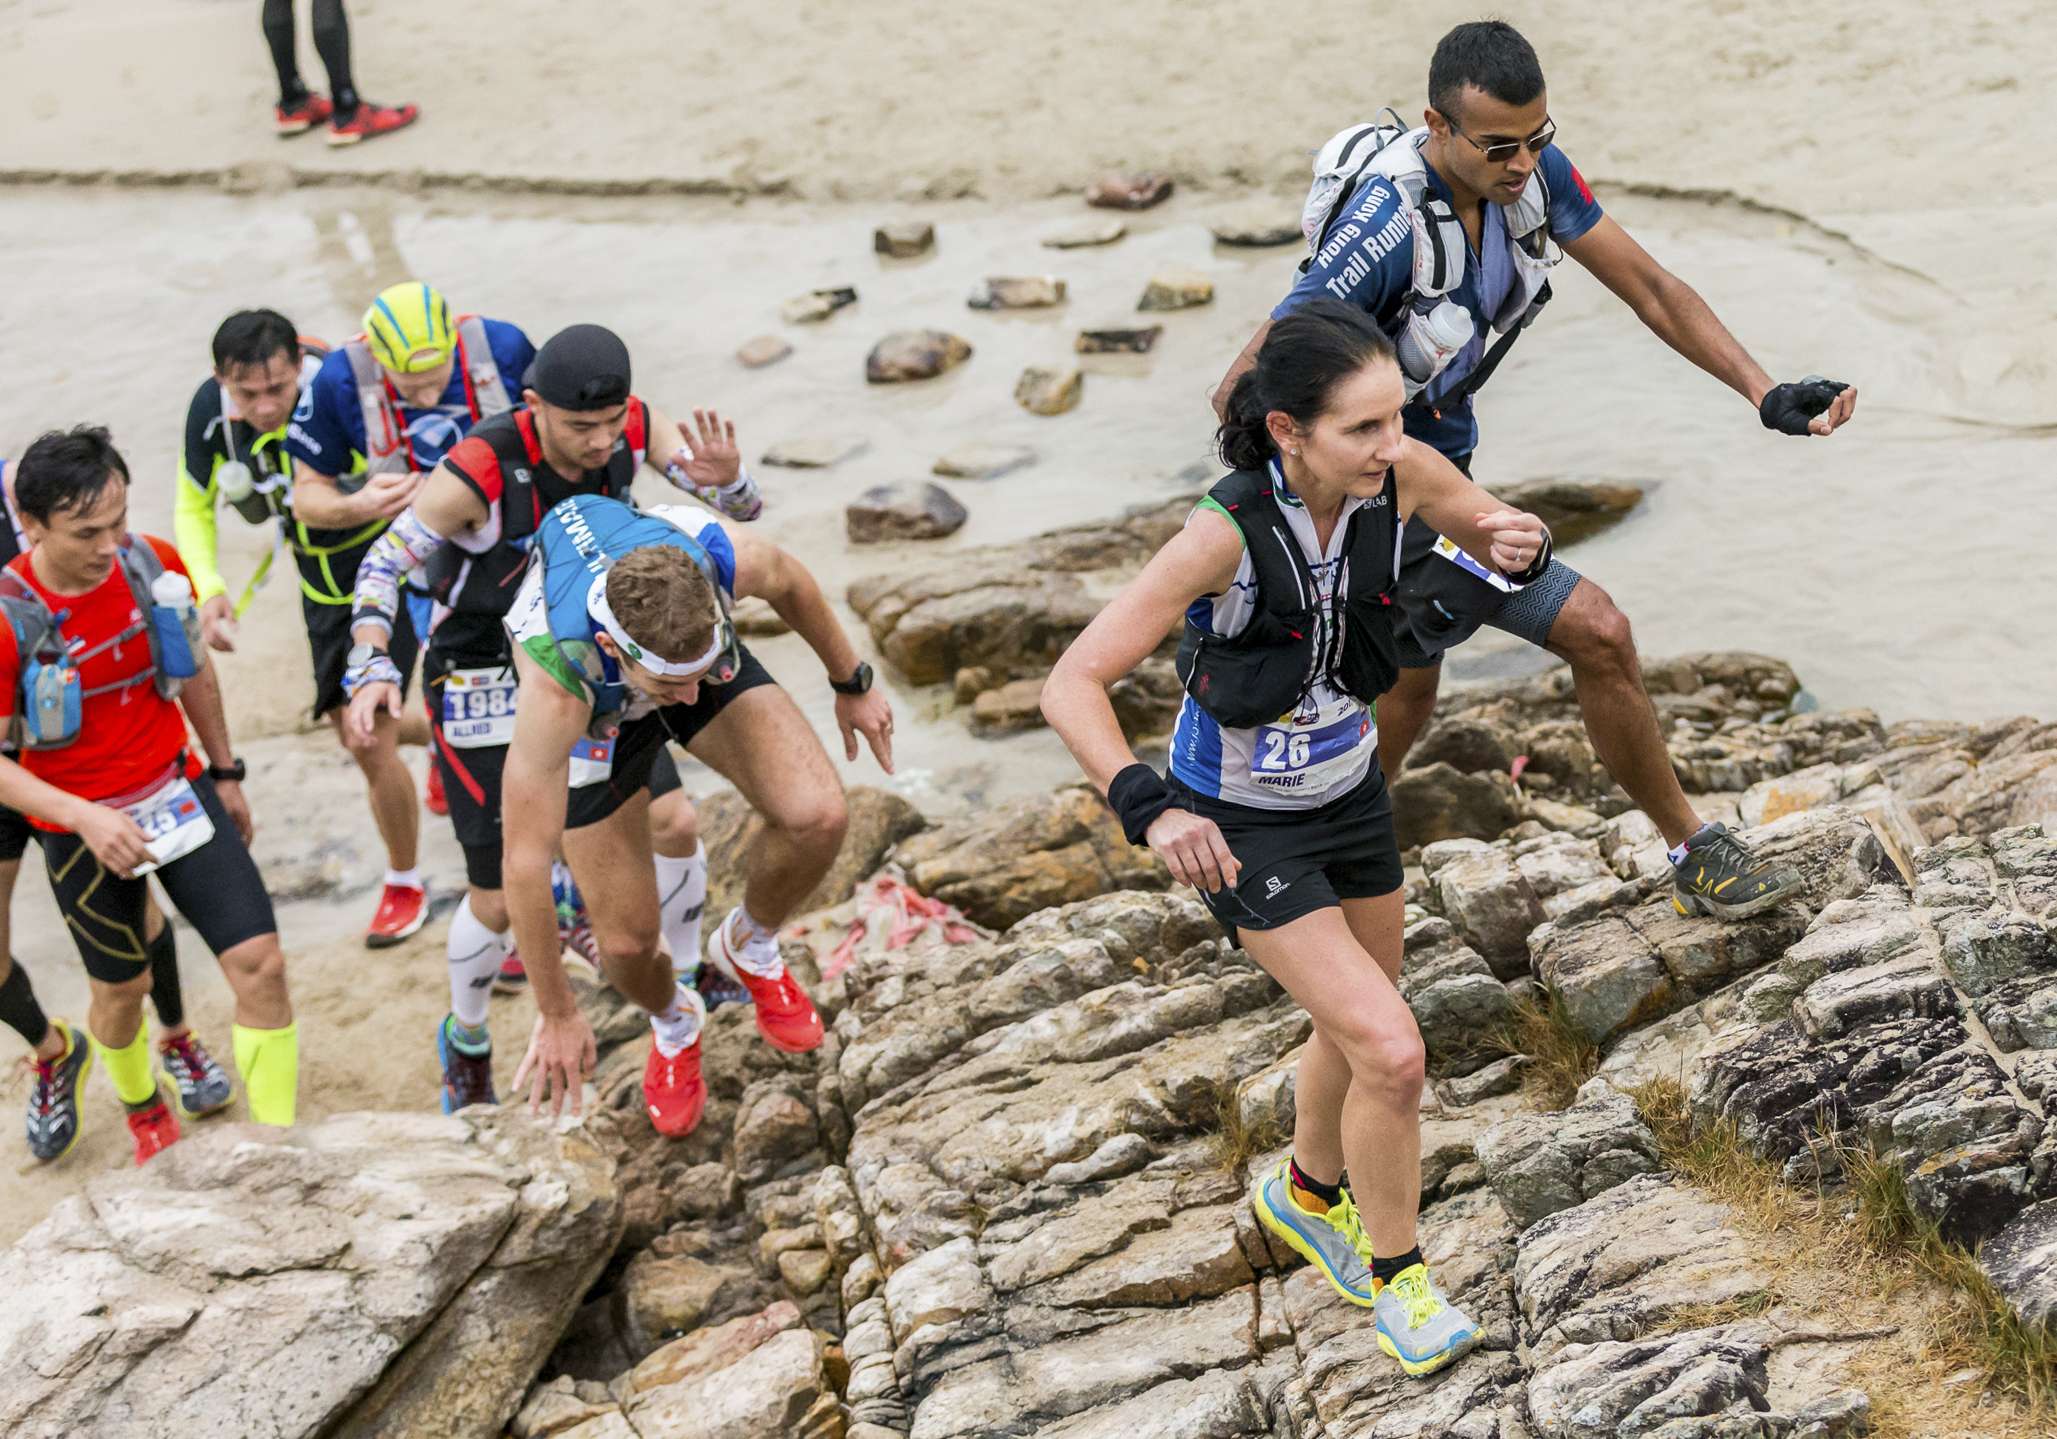 Marie McNaughton (above, right) competes in the Vibram Hong Kong 100 race in January. Around a quarter of trail racers in Hong Kong are women, and more are training with men these days. Photo: F8 Photography